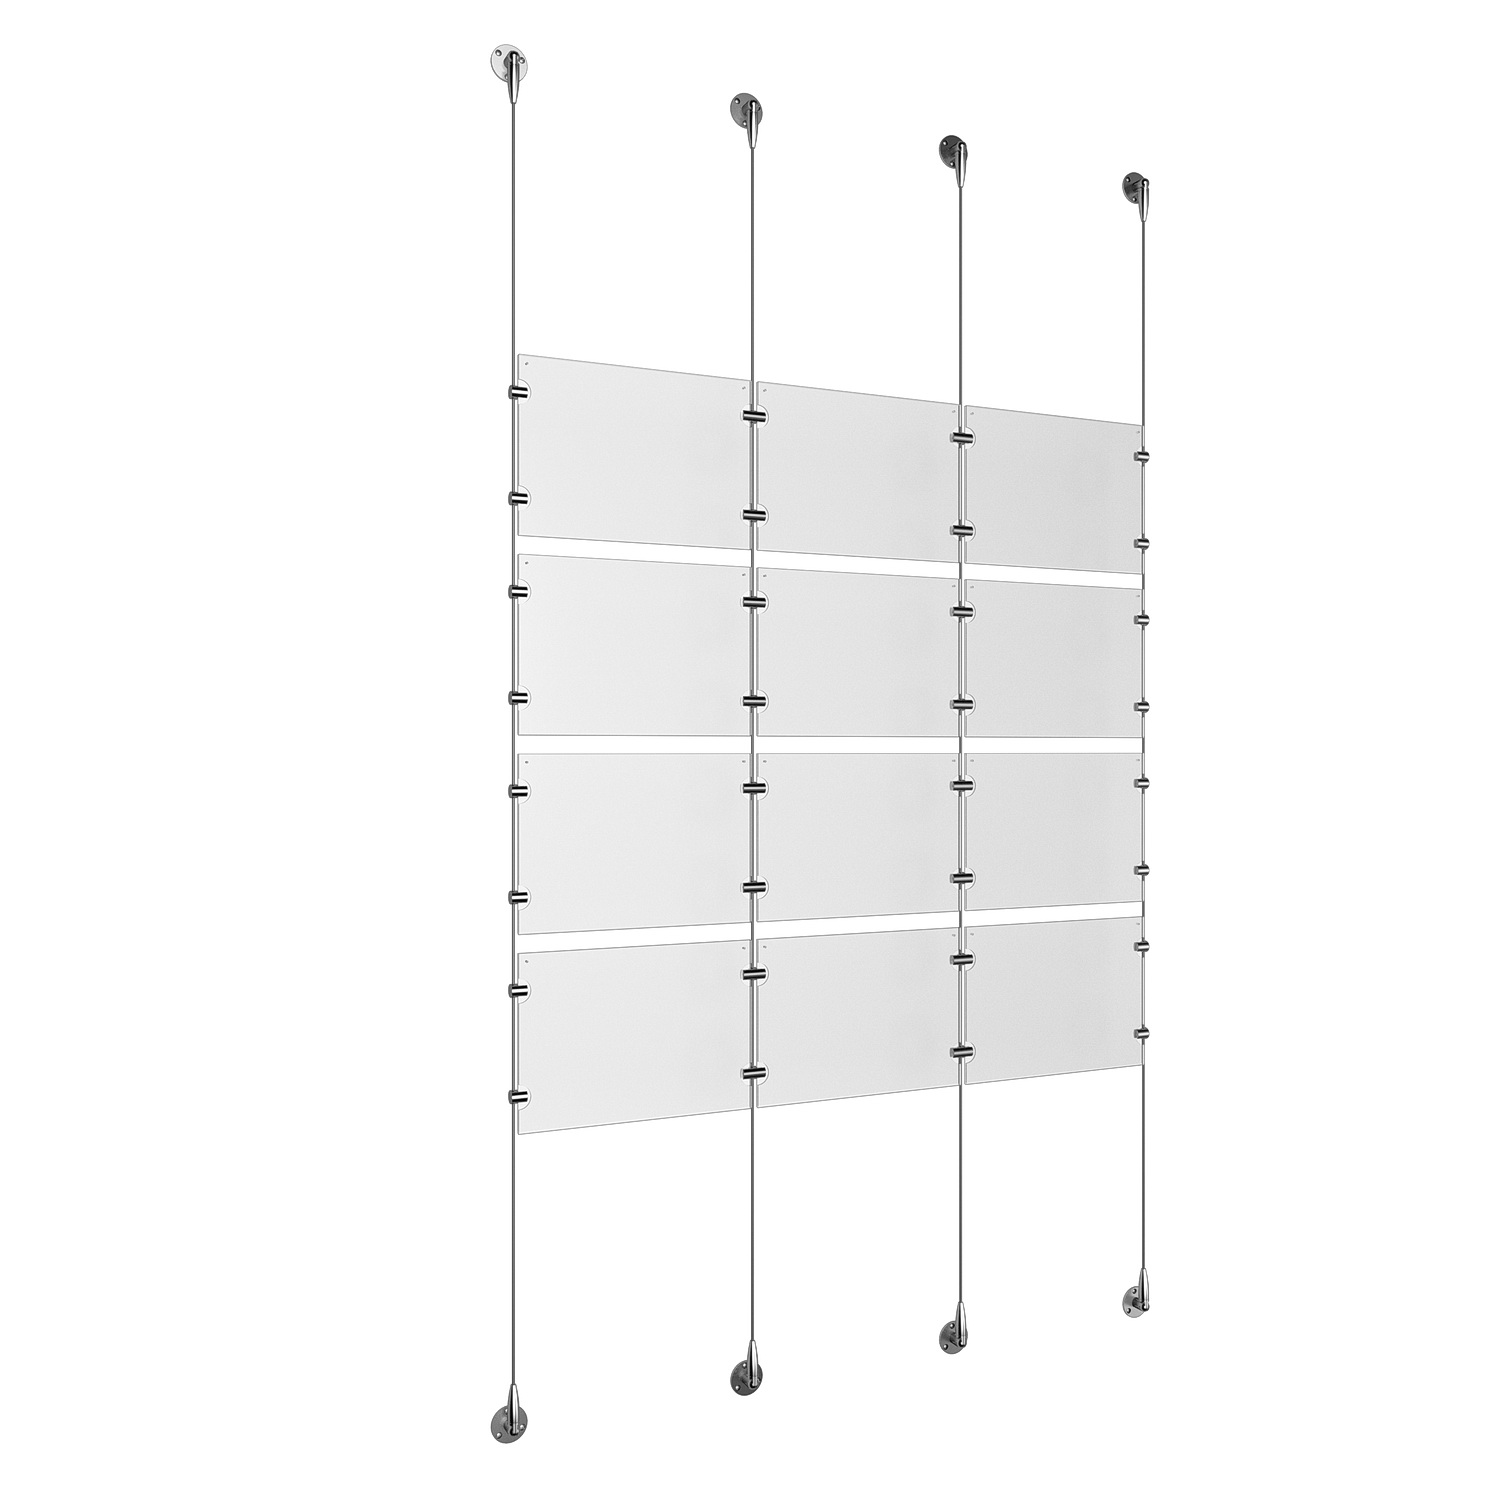 (12) 11'' Width x 8-1/2'' Height Clear Acrylic Frame & (4) Stainless Steel Satin Brushed Adjustable Angle Signature 1/8'' Cable Systems with (16) Single-Sided Panel Grippers (16) Double-Sided Panel Grippers